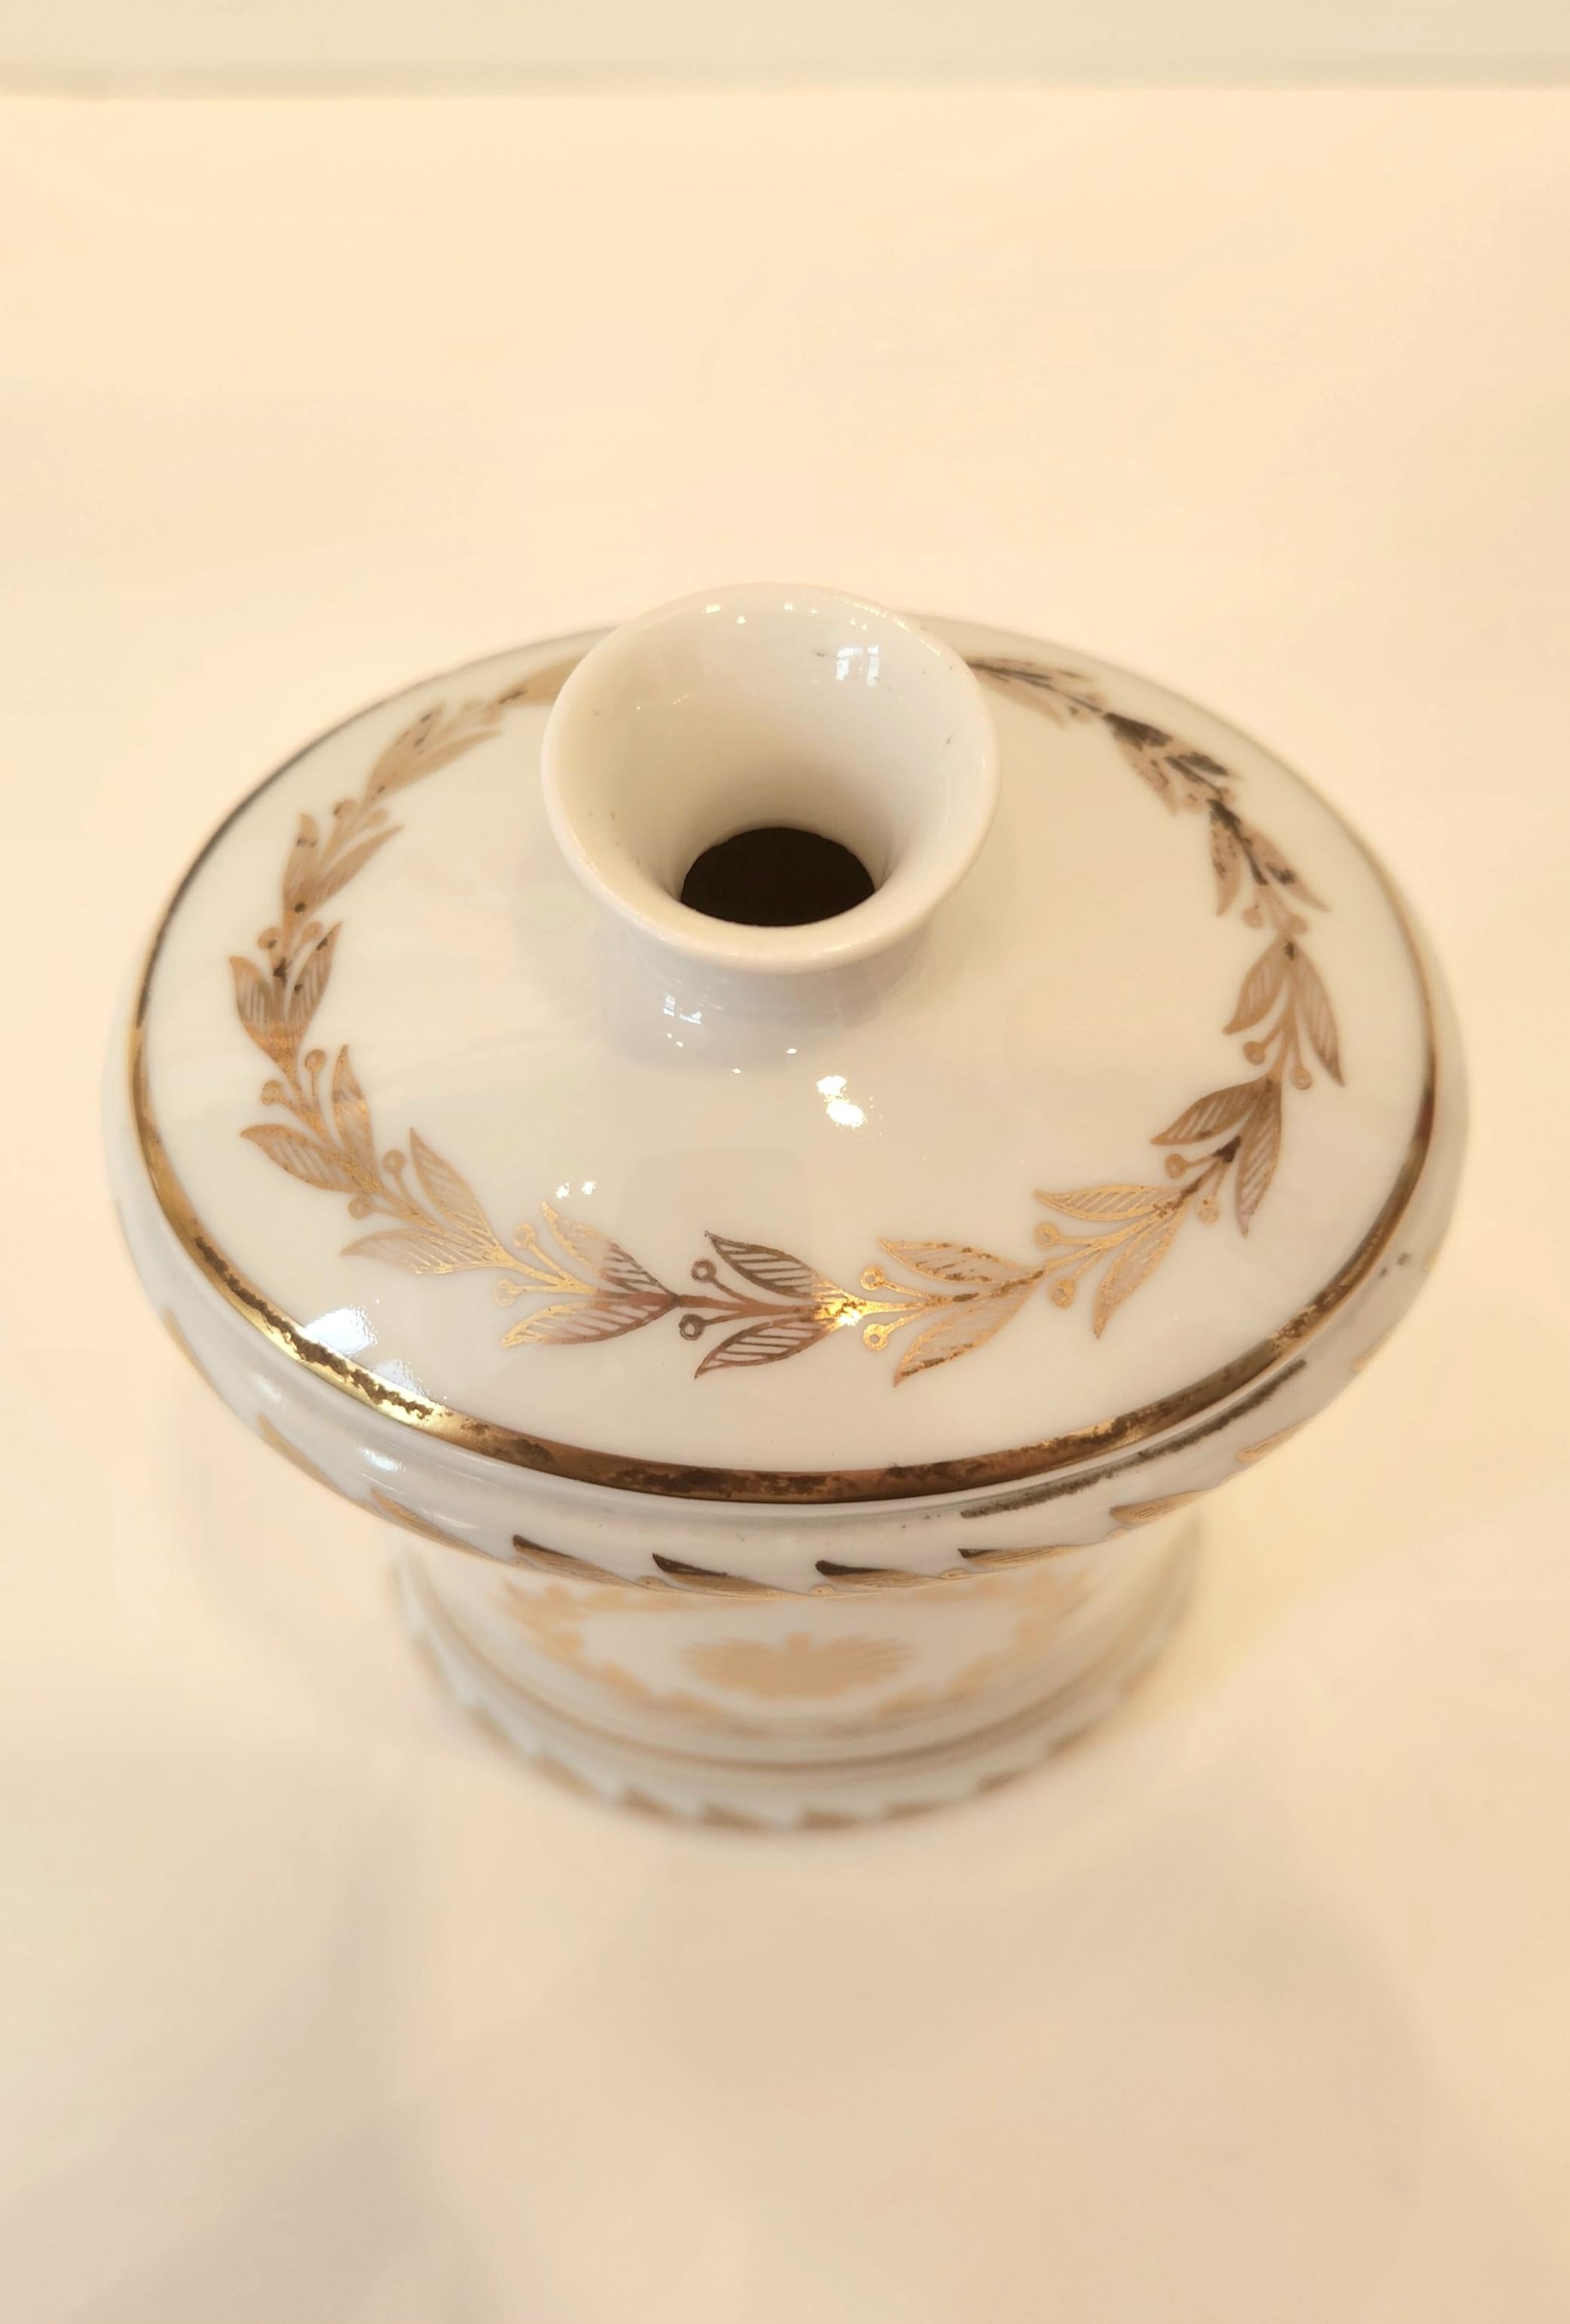 This beautiful Sevres vase is made of porcelain with a gold design and meant to hold a single flower. This hand painted porcelain vase is wonderful as decoration on its own, as well as holding flowers or greenery. The style of the design is very